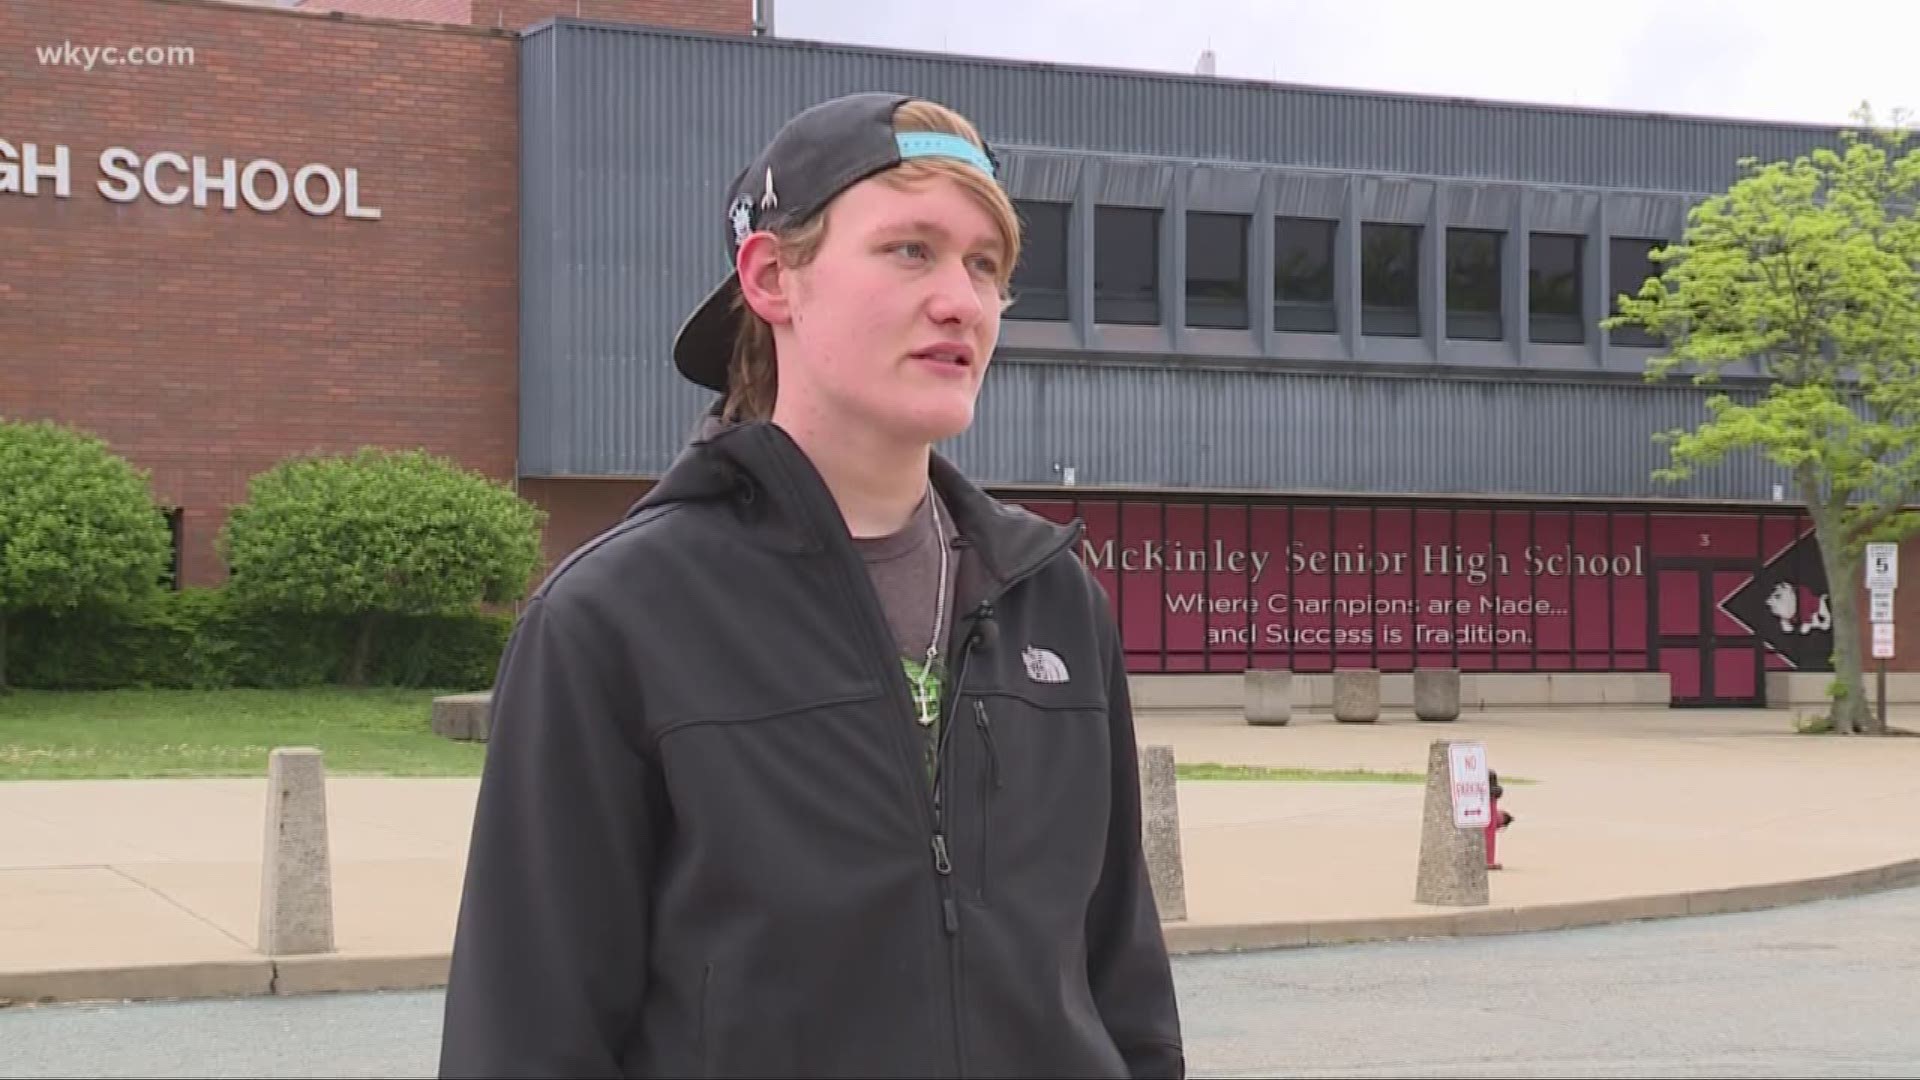 Canton teen lost more than 100 pounds by walking to school everyday